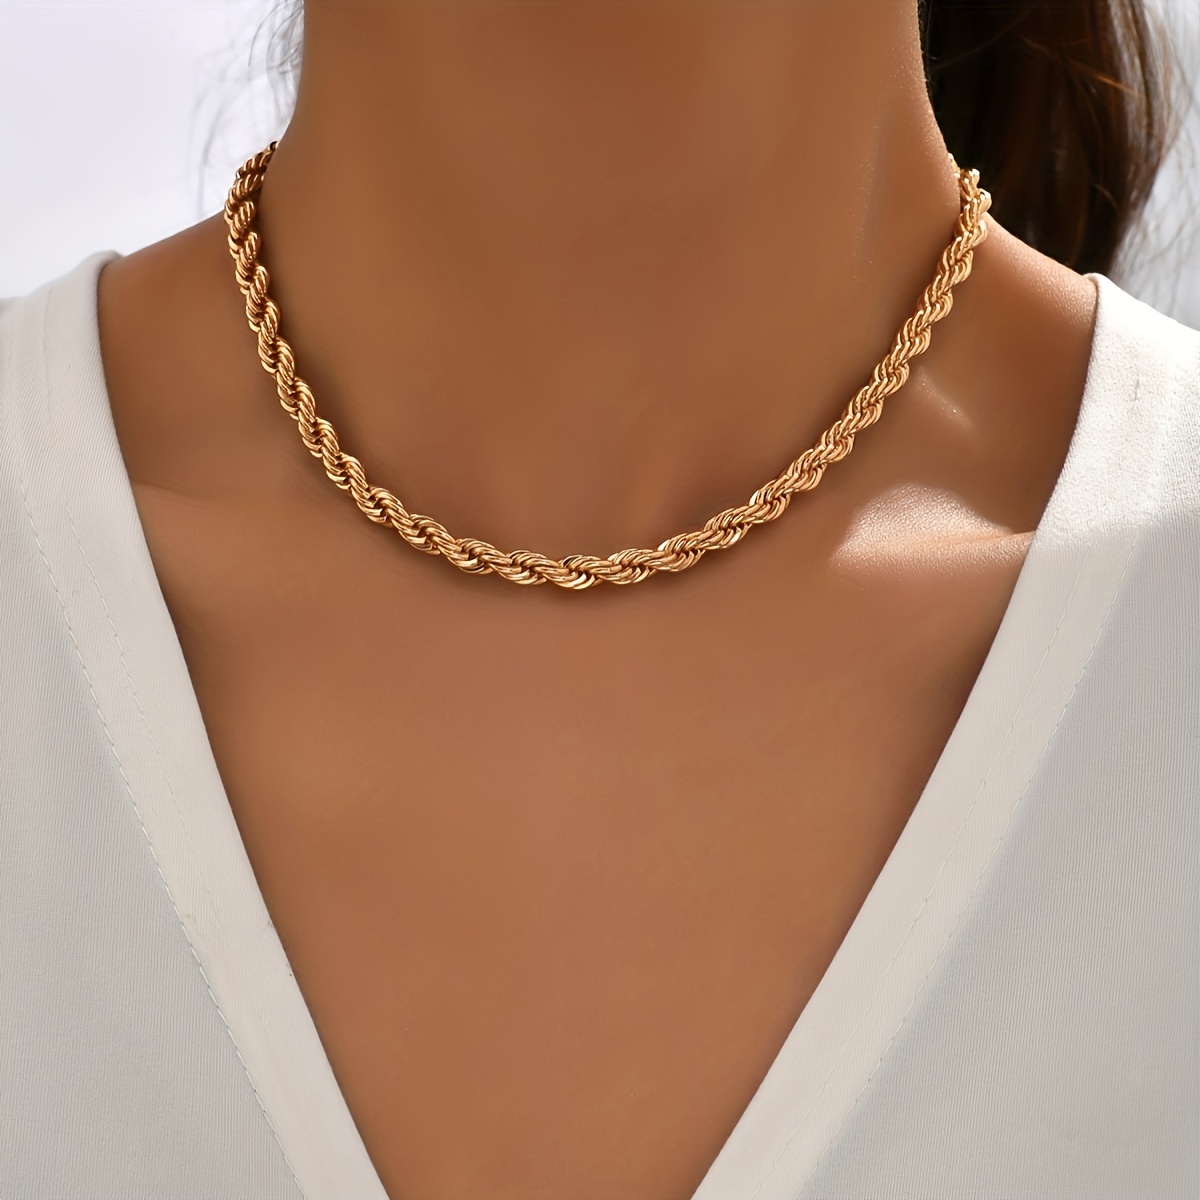 

Punk Twist Necklace Simple Elegant Collarbone Chain Trendy Golden Alloy Jewelry For Women Casual